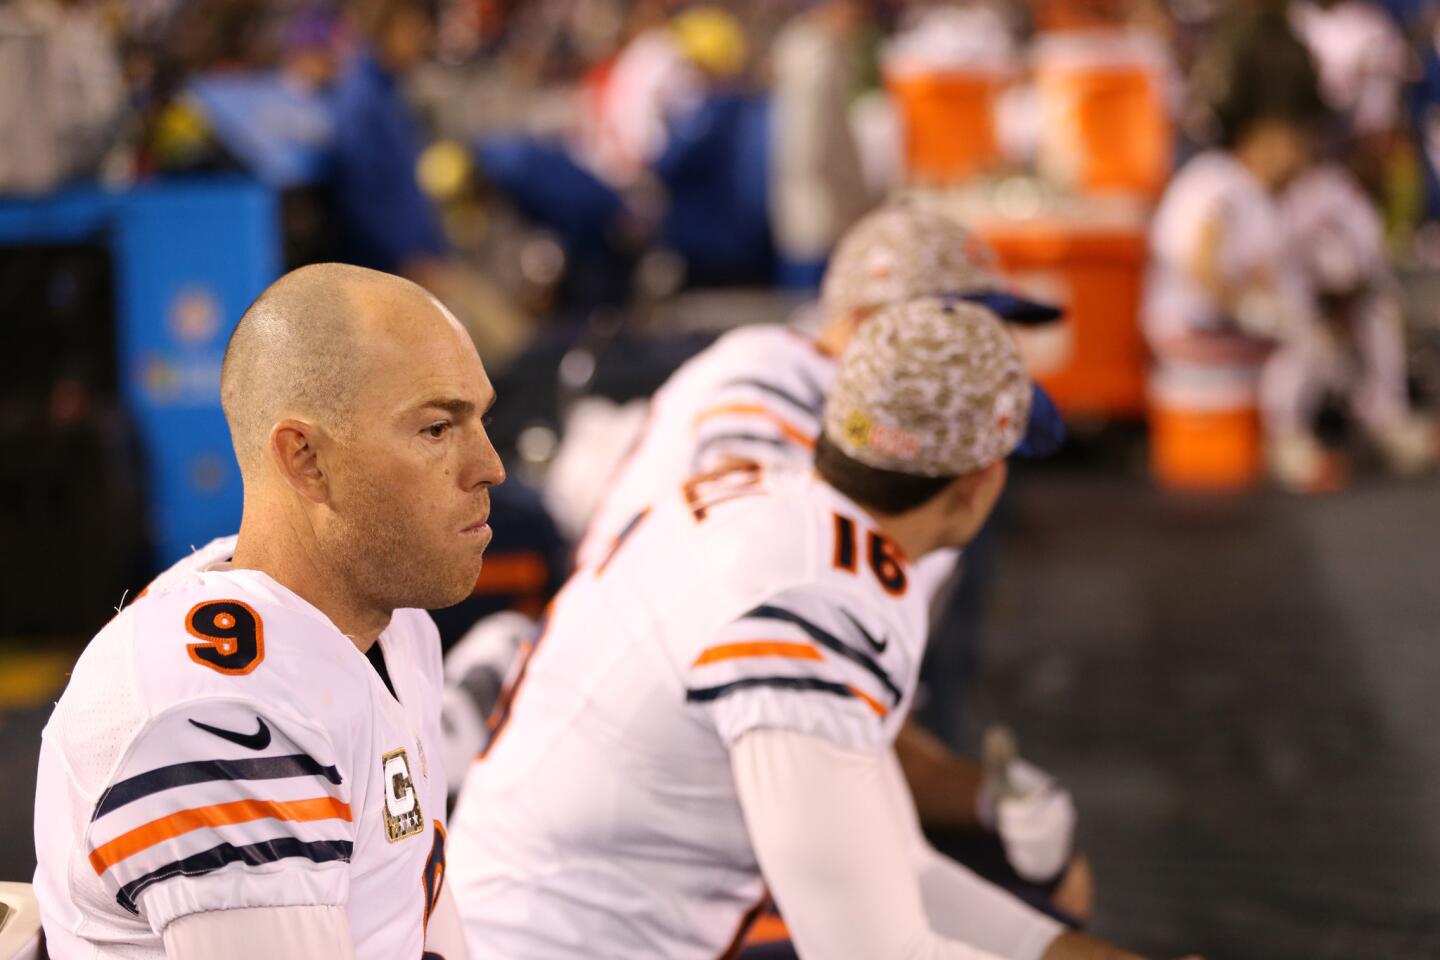 Bears kicker Robbie Gould sits on the bench after missing a field goal in the first quarter against the Chargers.